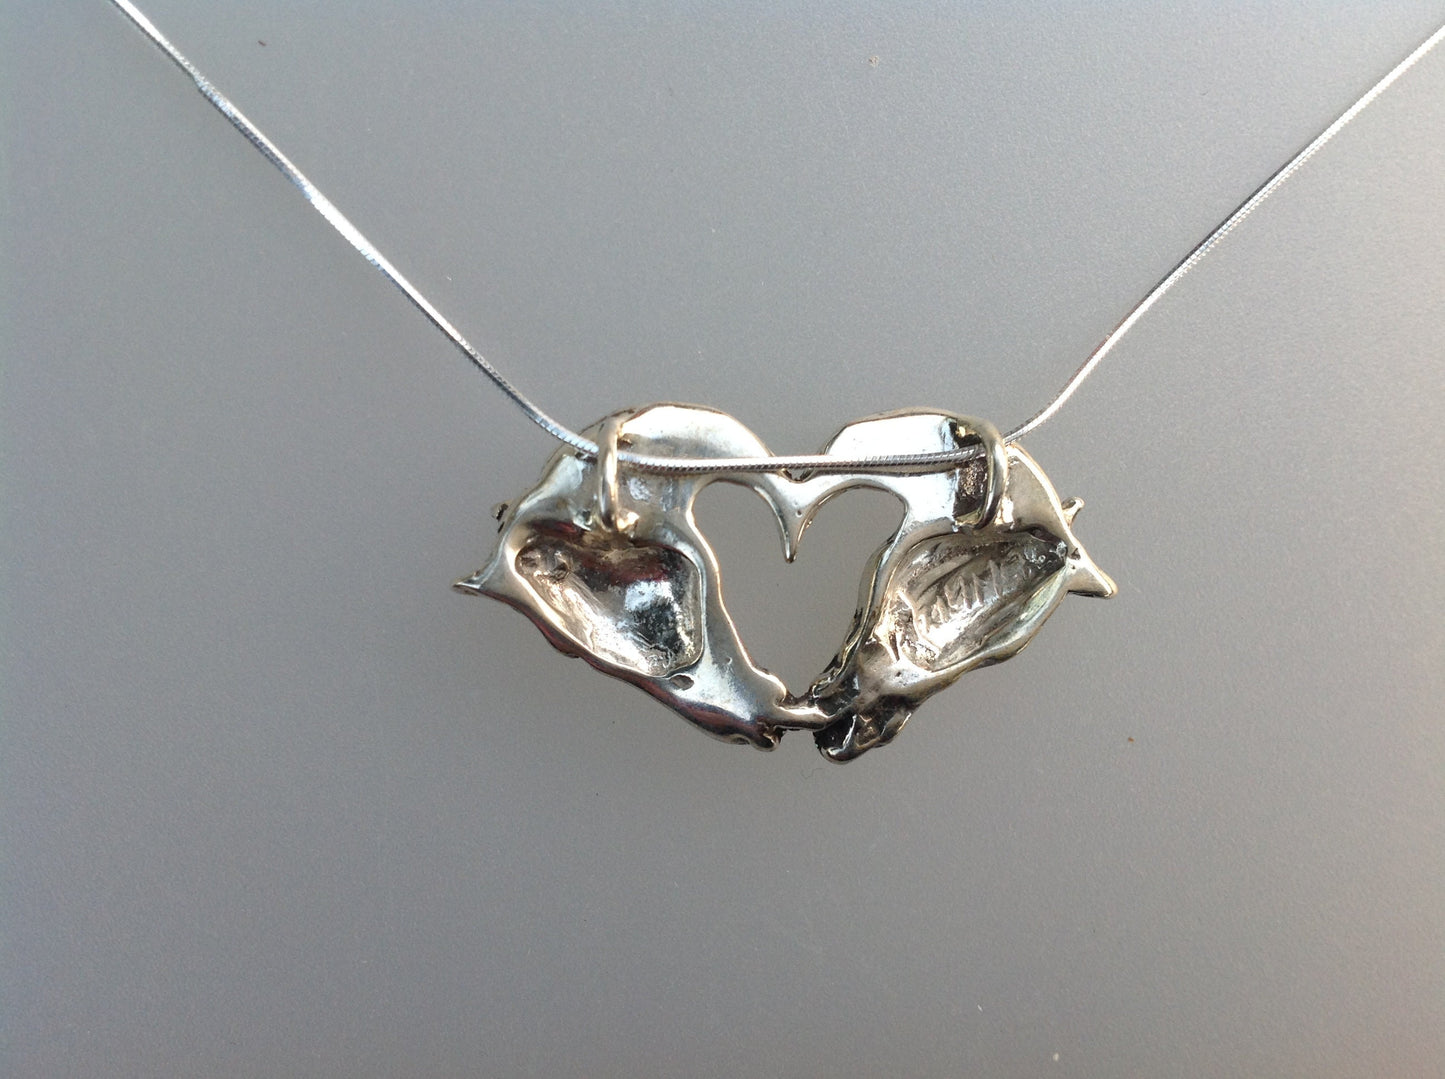 Horses heads heart pendant sterling silver with stone eyes necklace gift for horse lover jewelry Zimmer